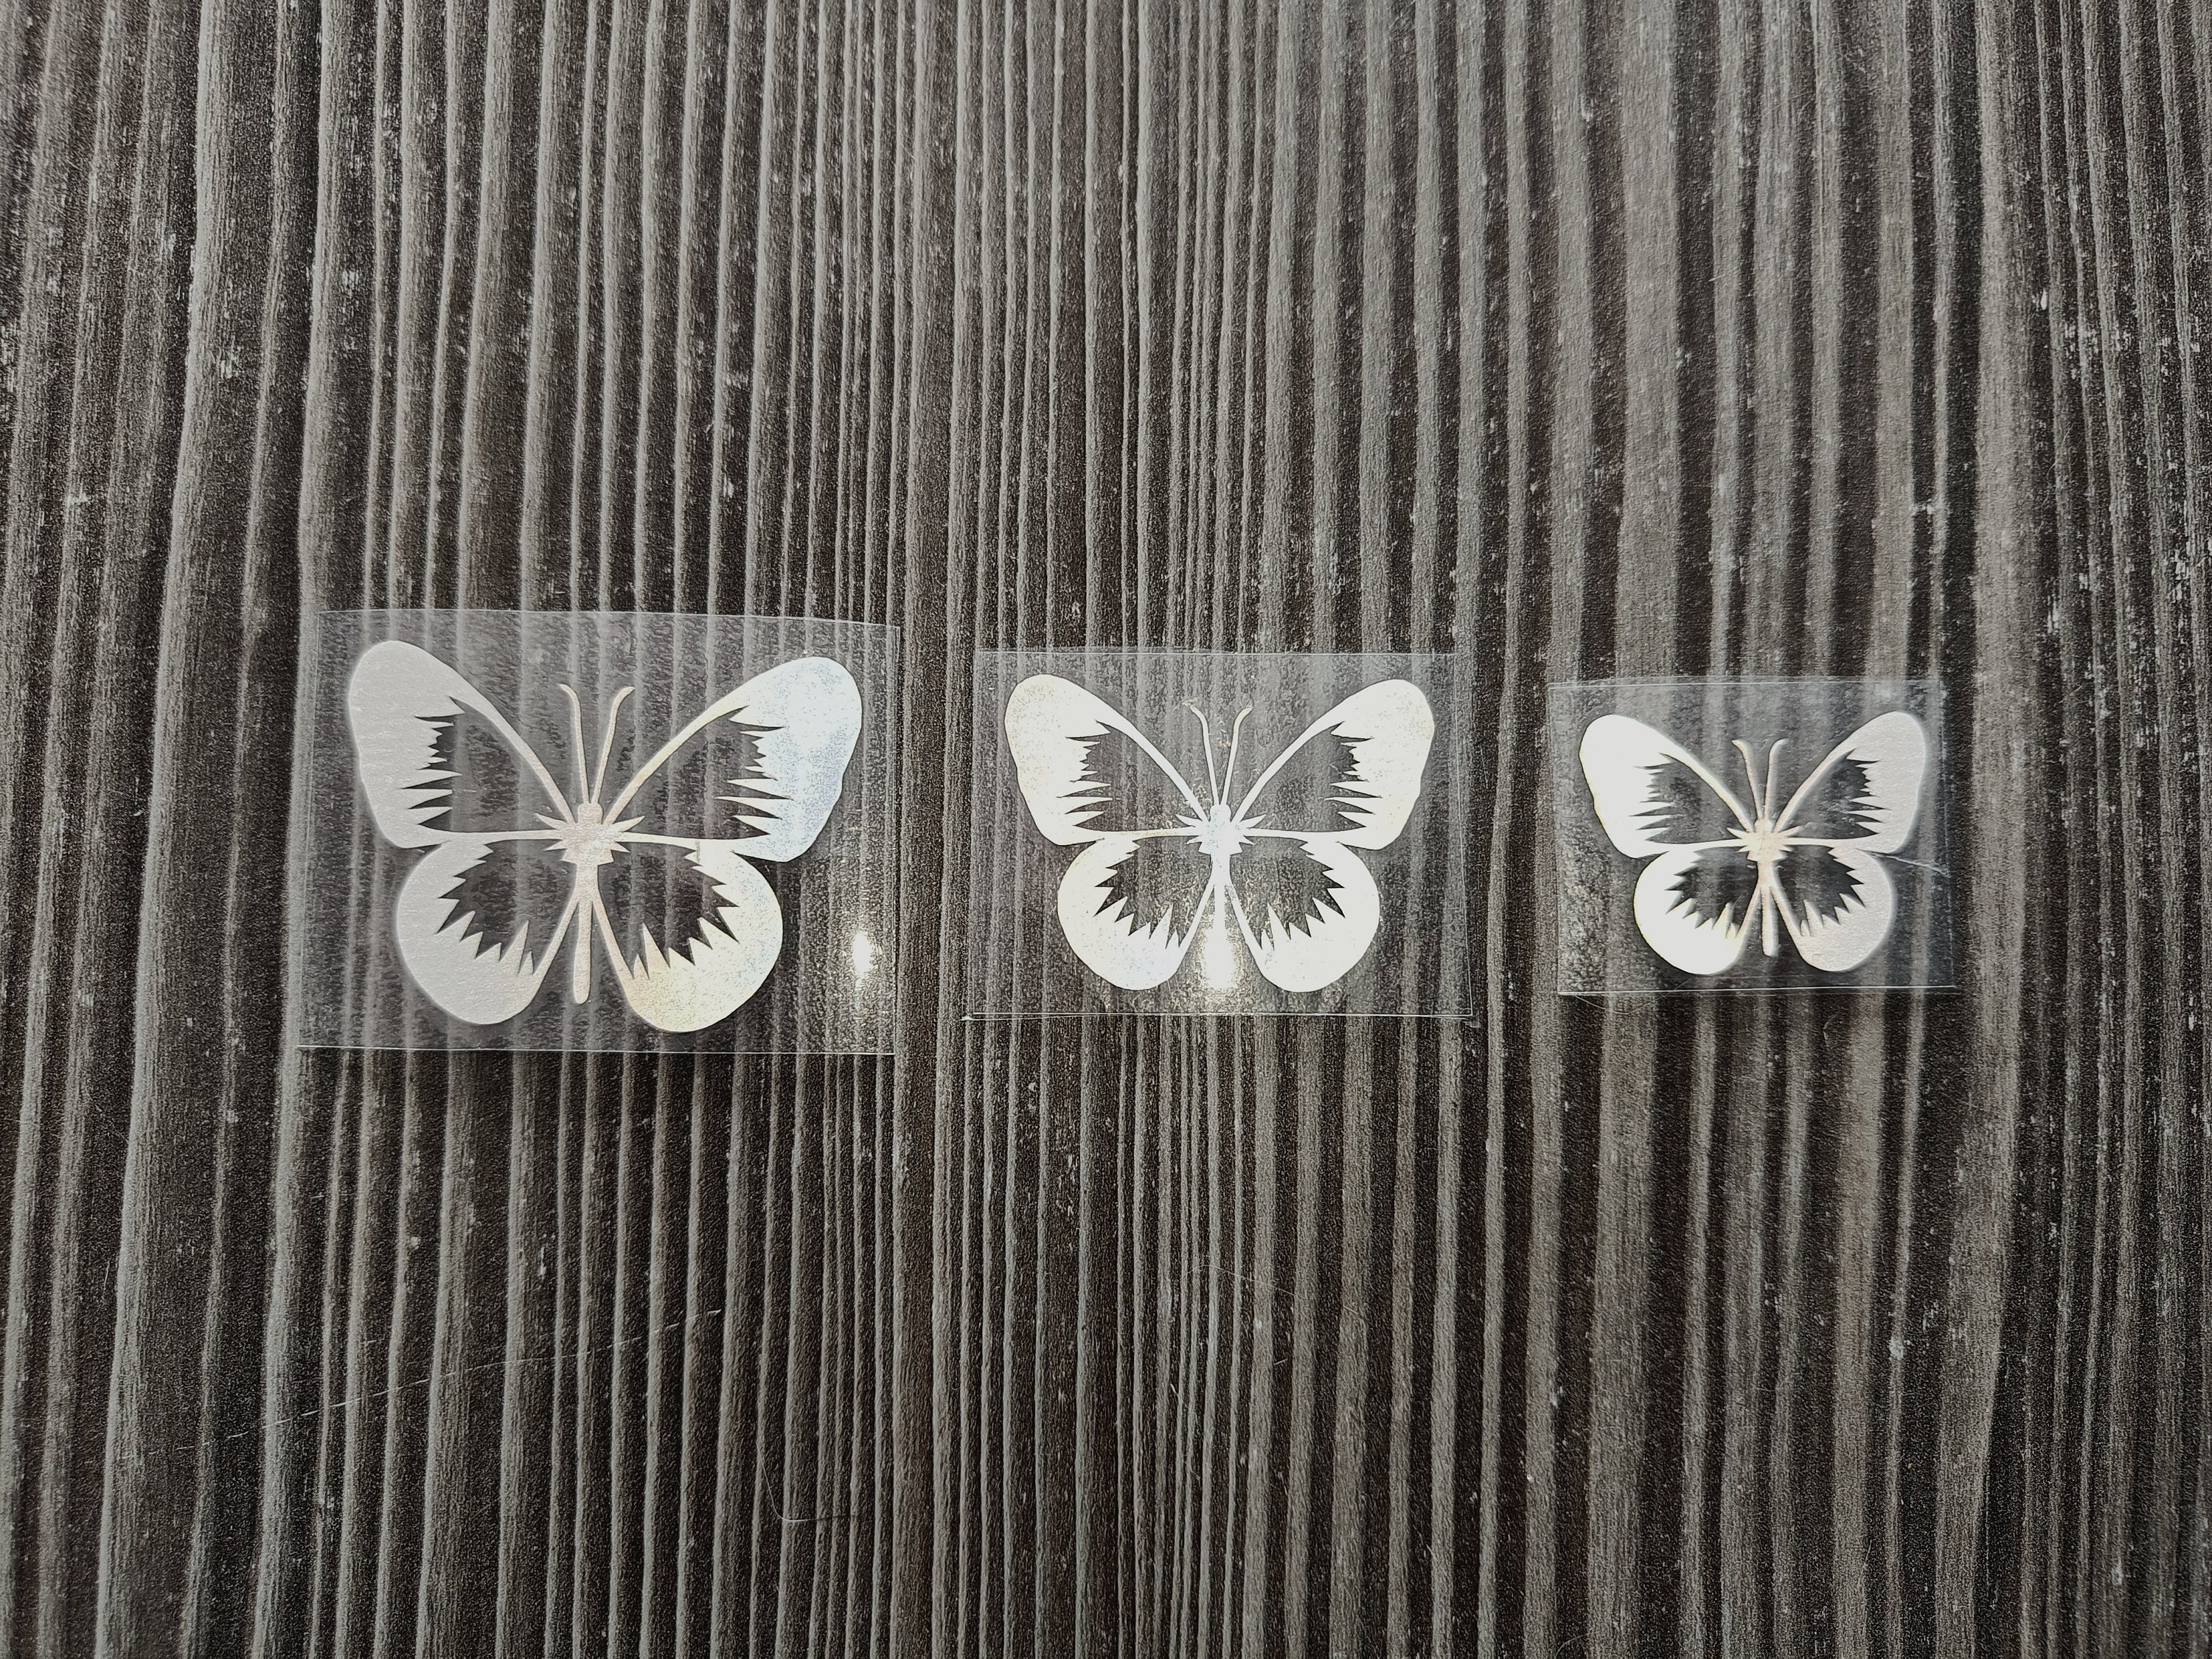 Iron on Decals for Sneakers, Reflective Heat Transfer Stickers Butterflies  Blue for Shoes (4pcs) : Buy Online at Best Price in KSA - Souq is now  : Fashion